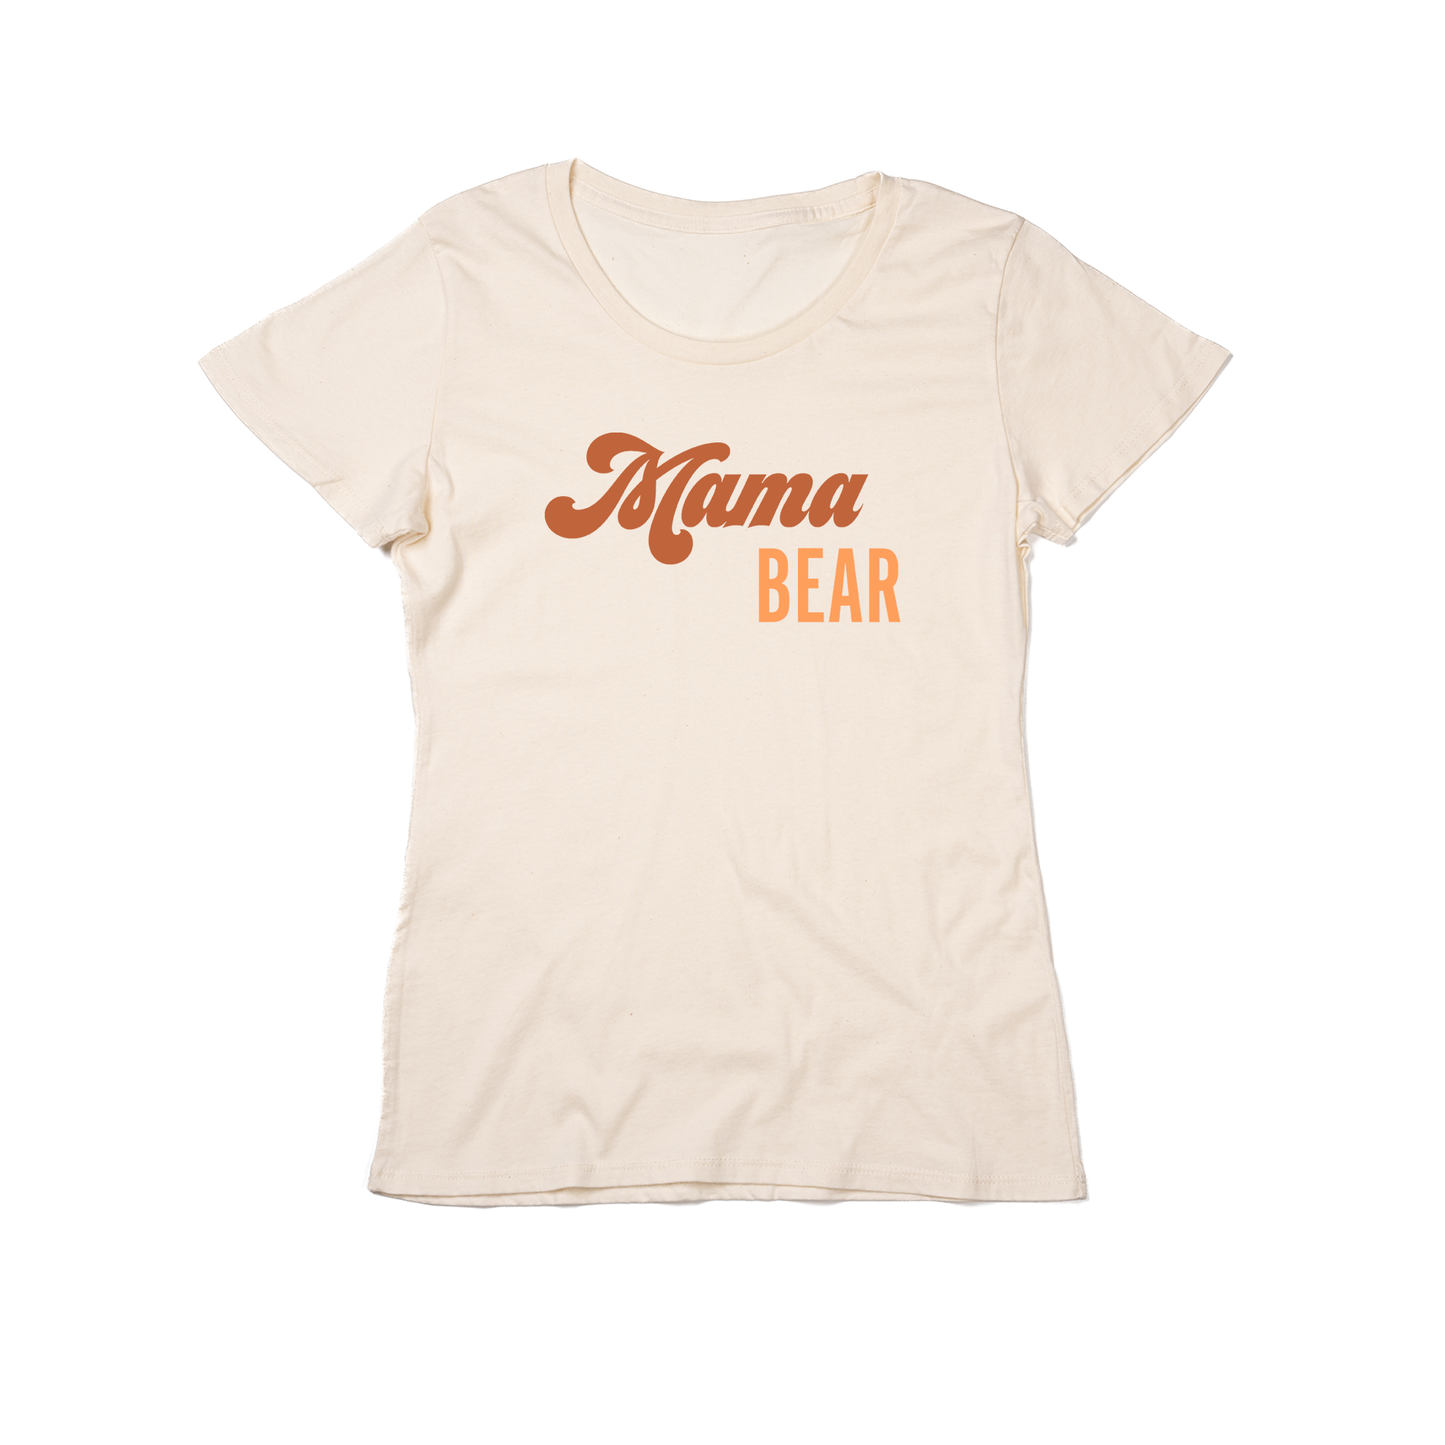 Mama Bear - Women's Fitted Tee (Natural)